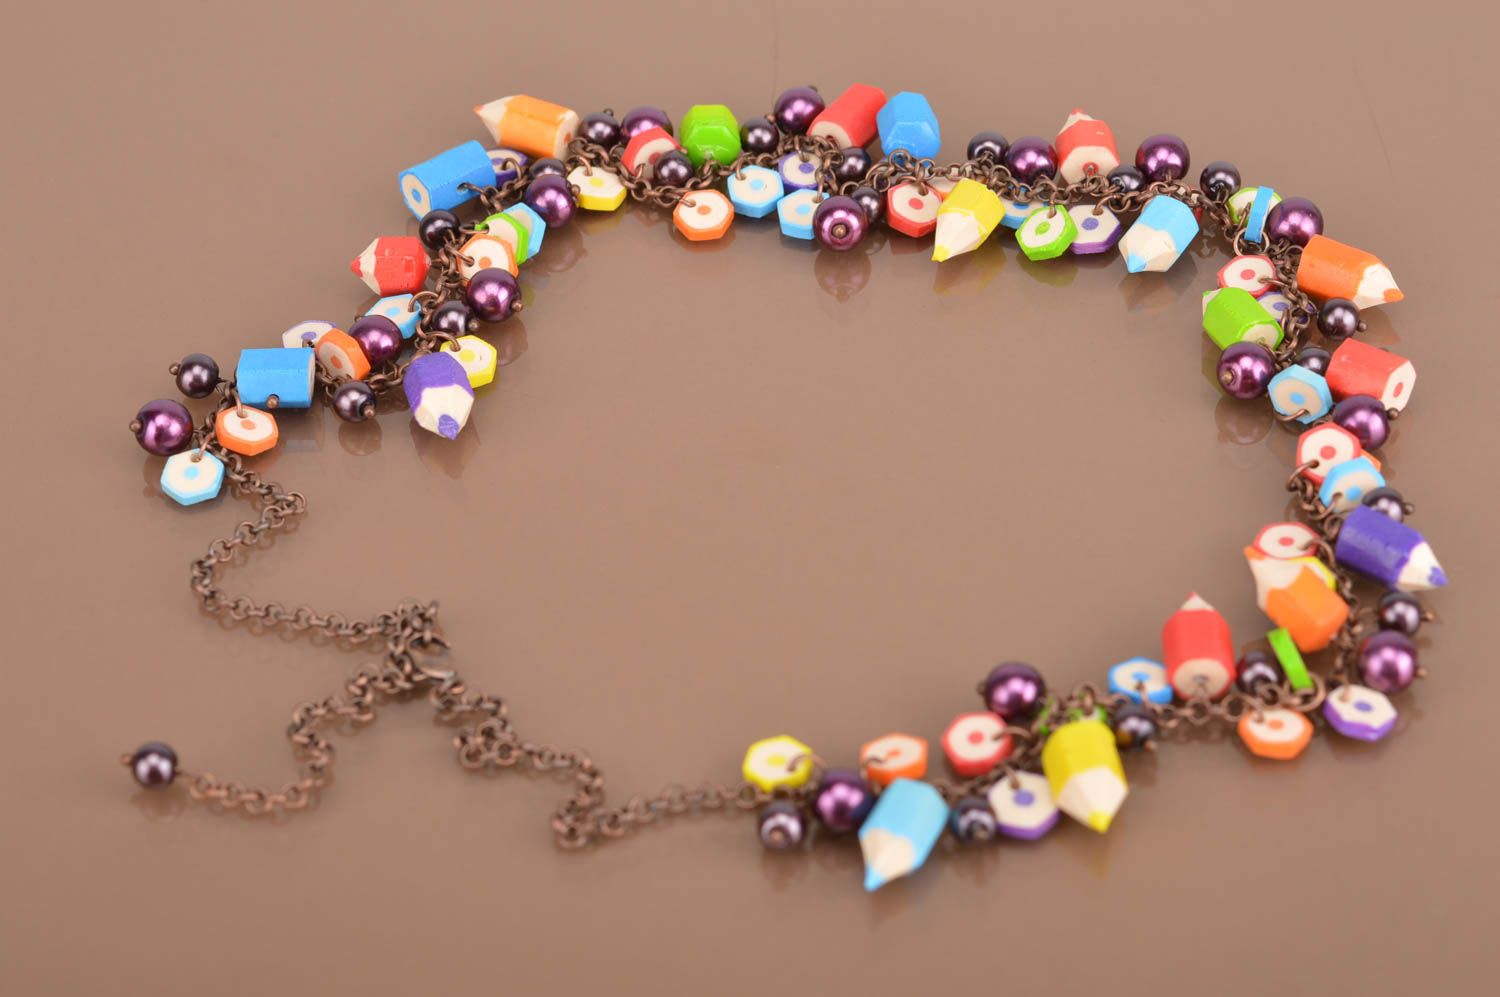 Unusual handmade polymer clay necklace funny plastic necklace jewelry designs photo 4